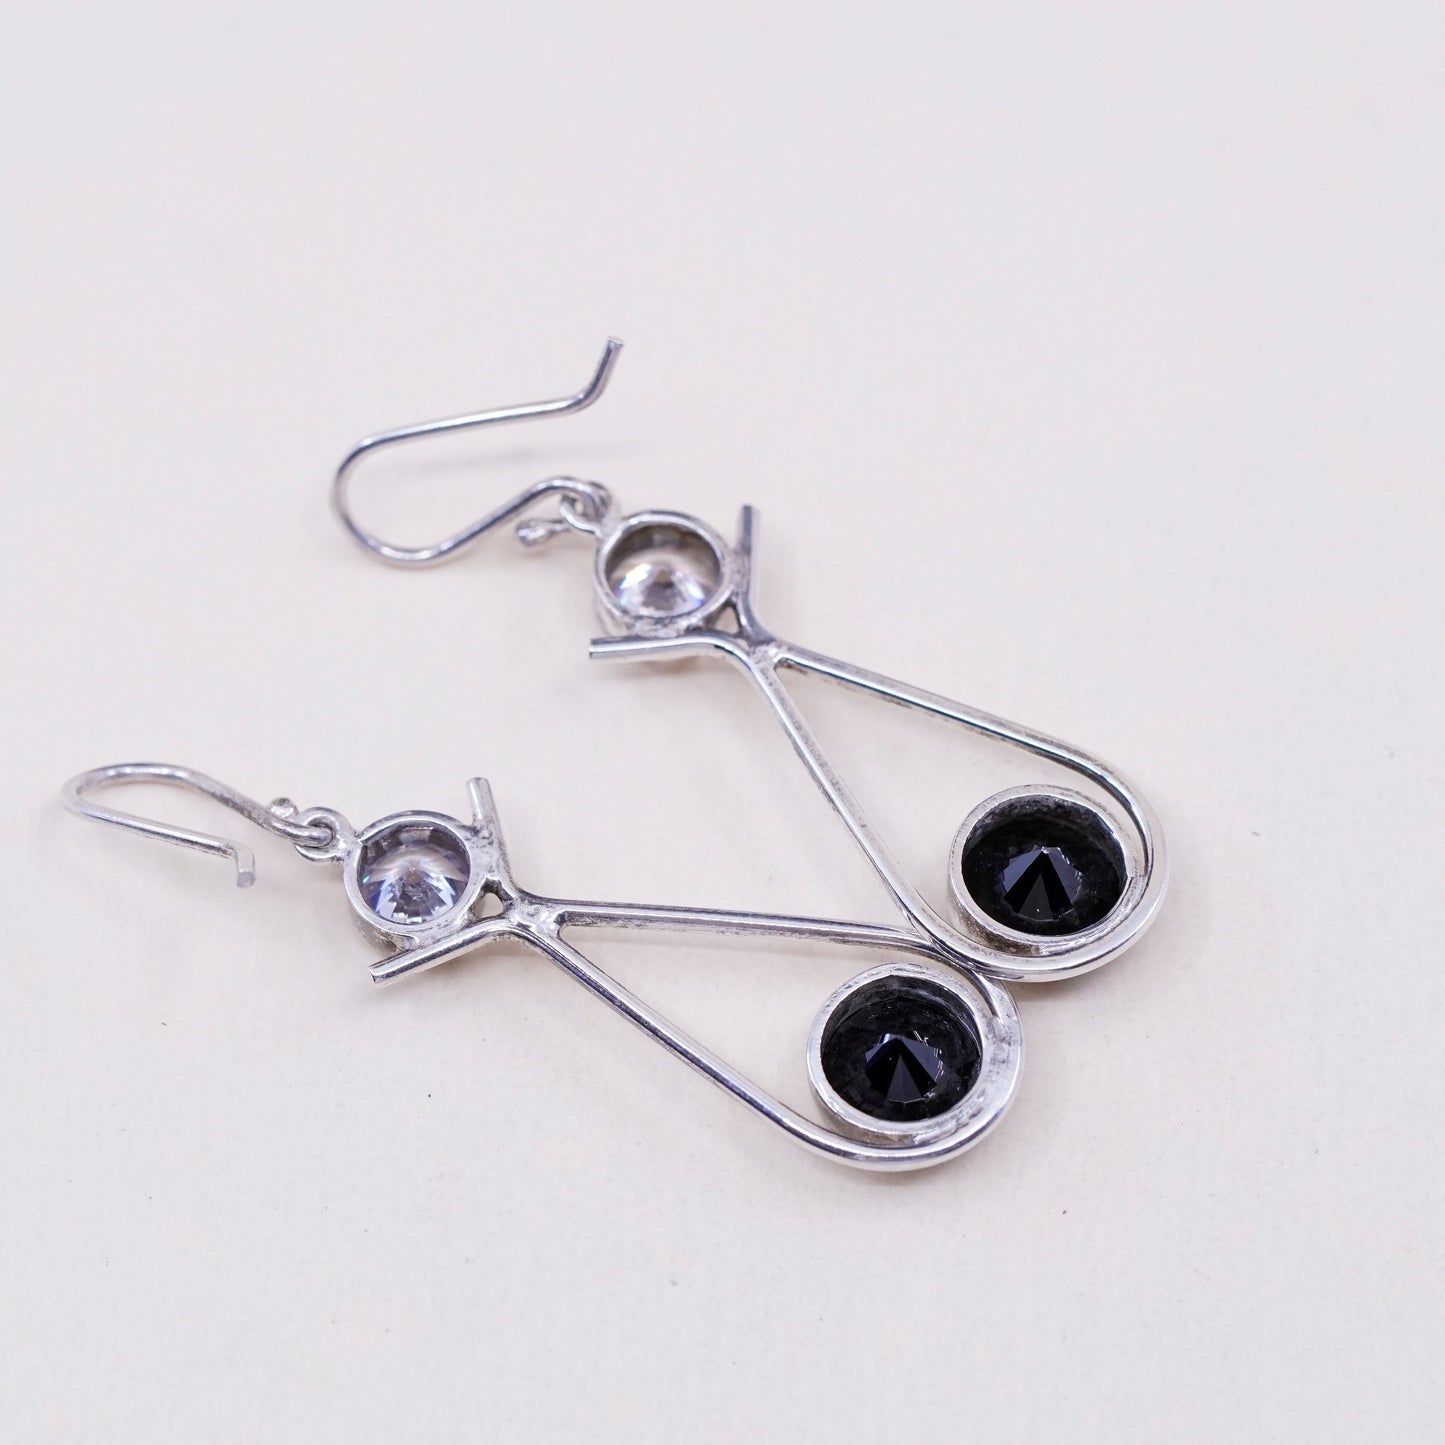 Vintage 925 Sterling silver clip on earrings with hematite and Cz